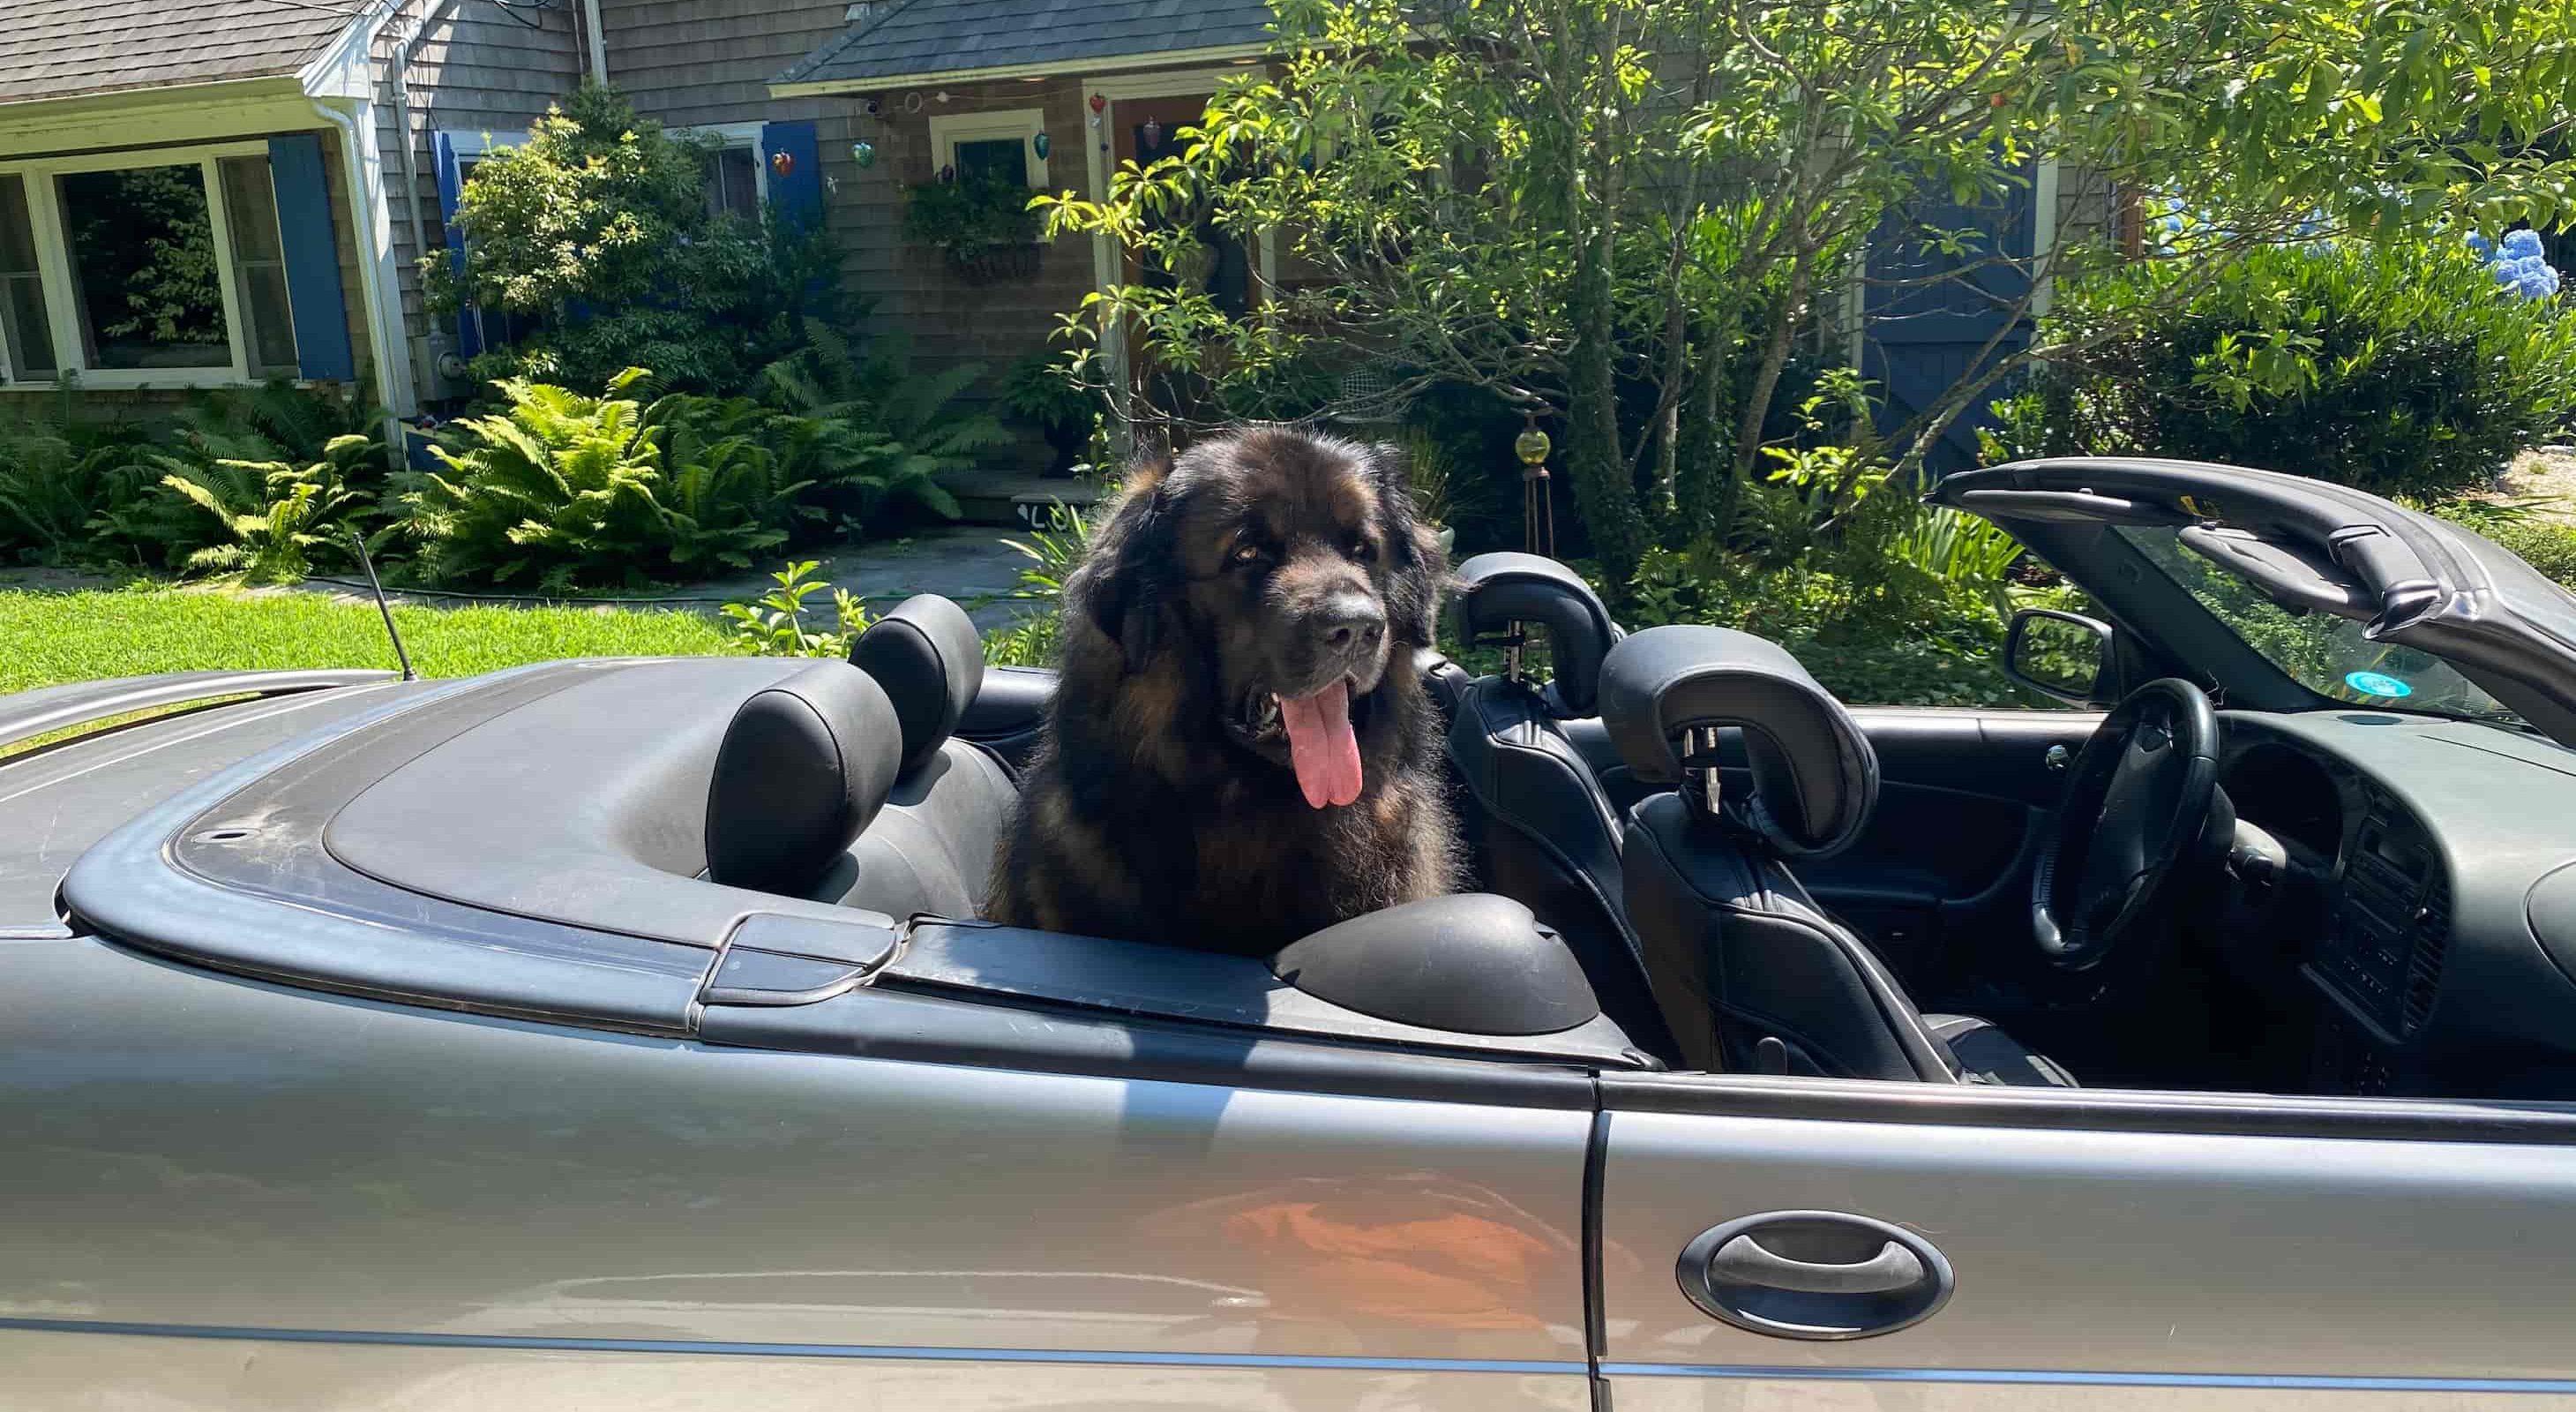 Brody the dog sitting in a car